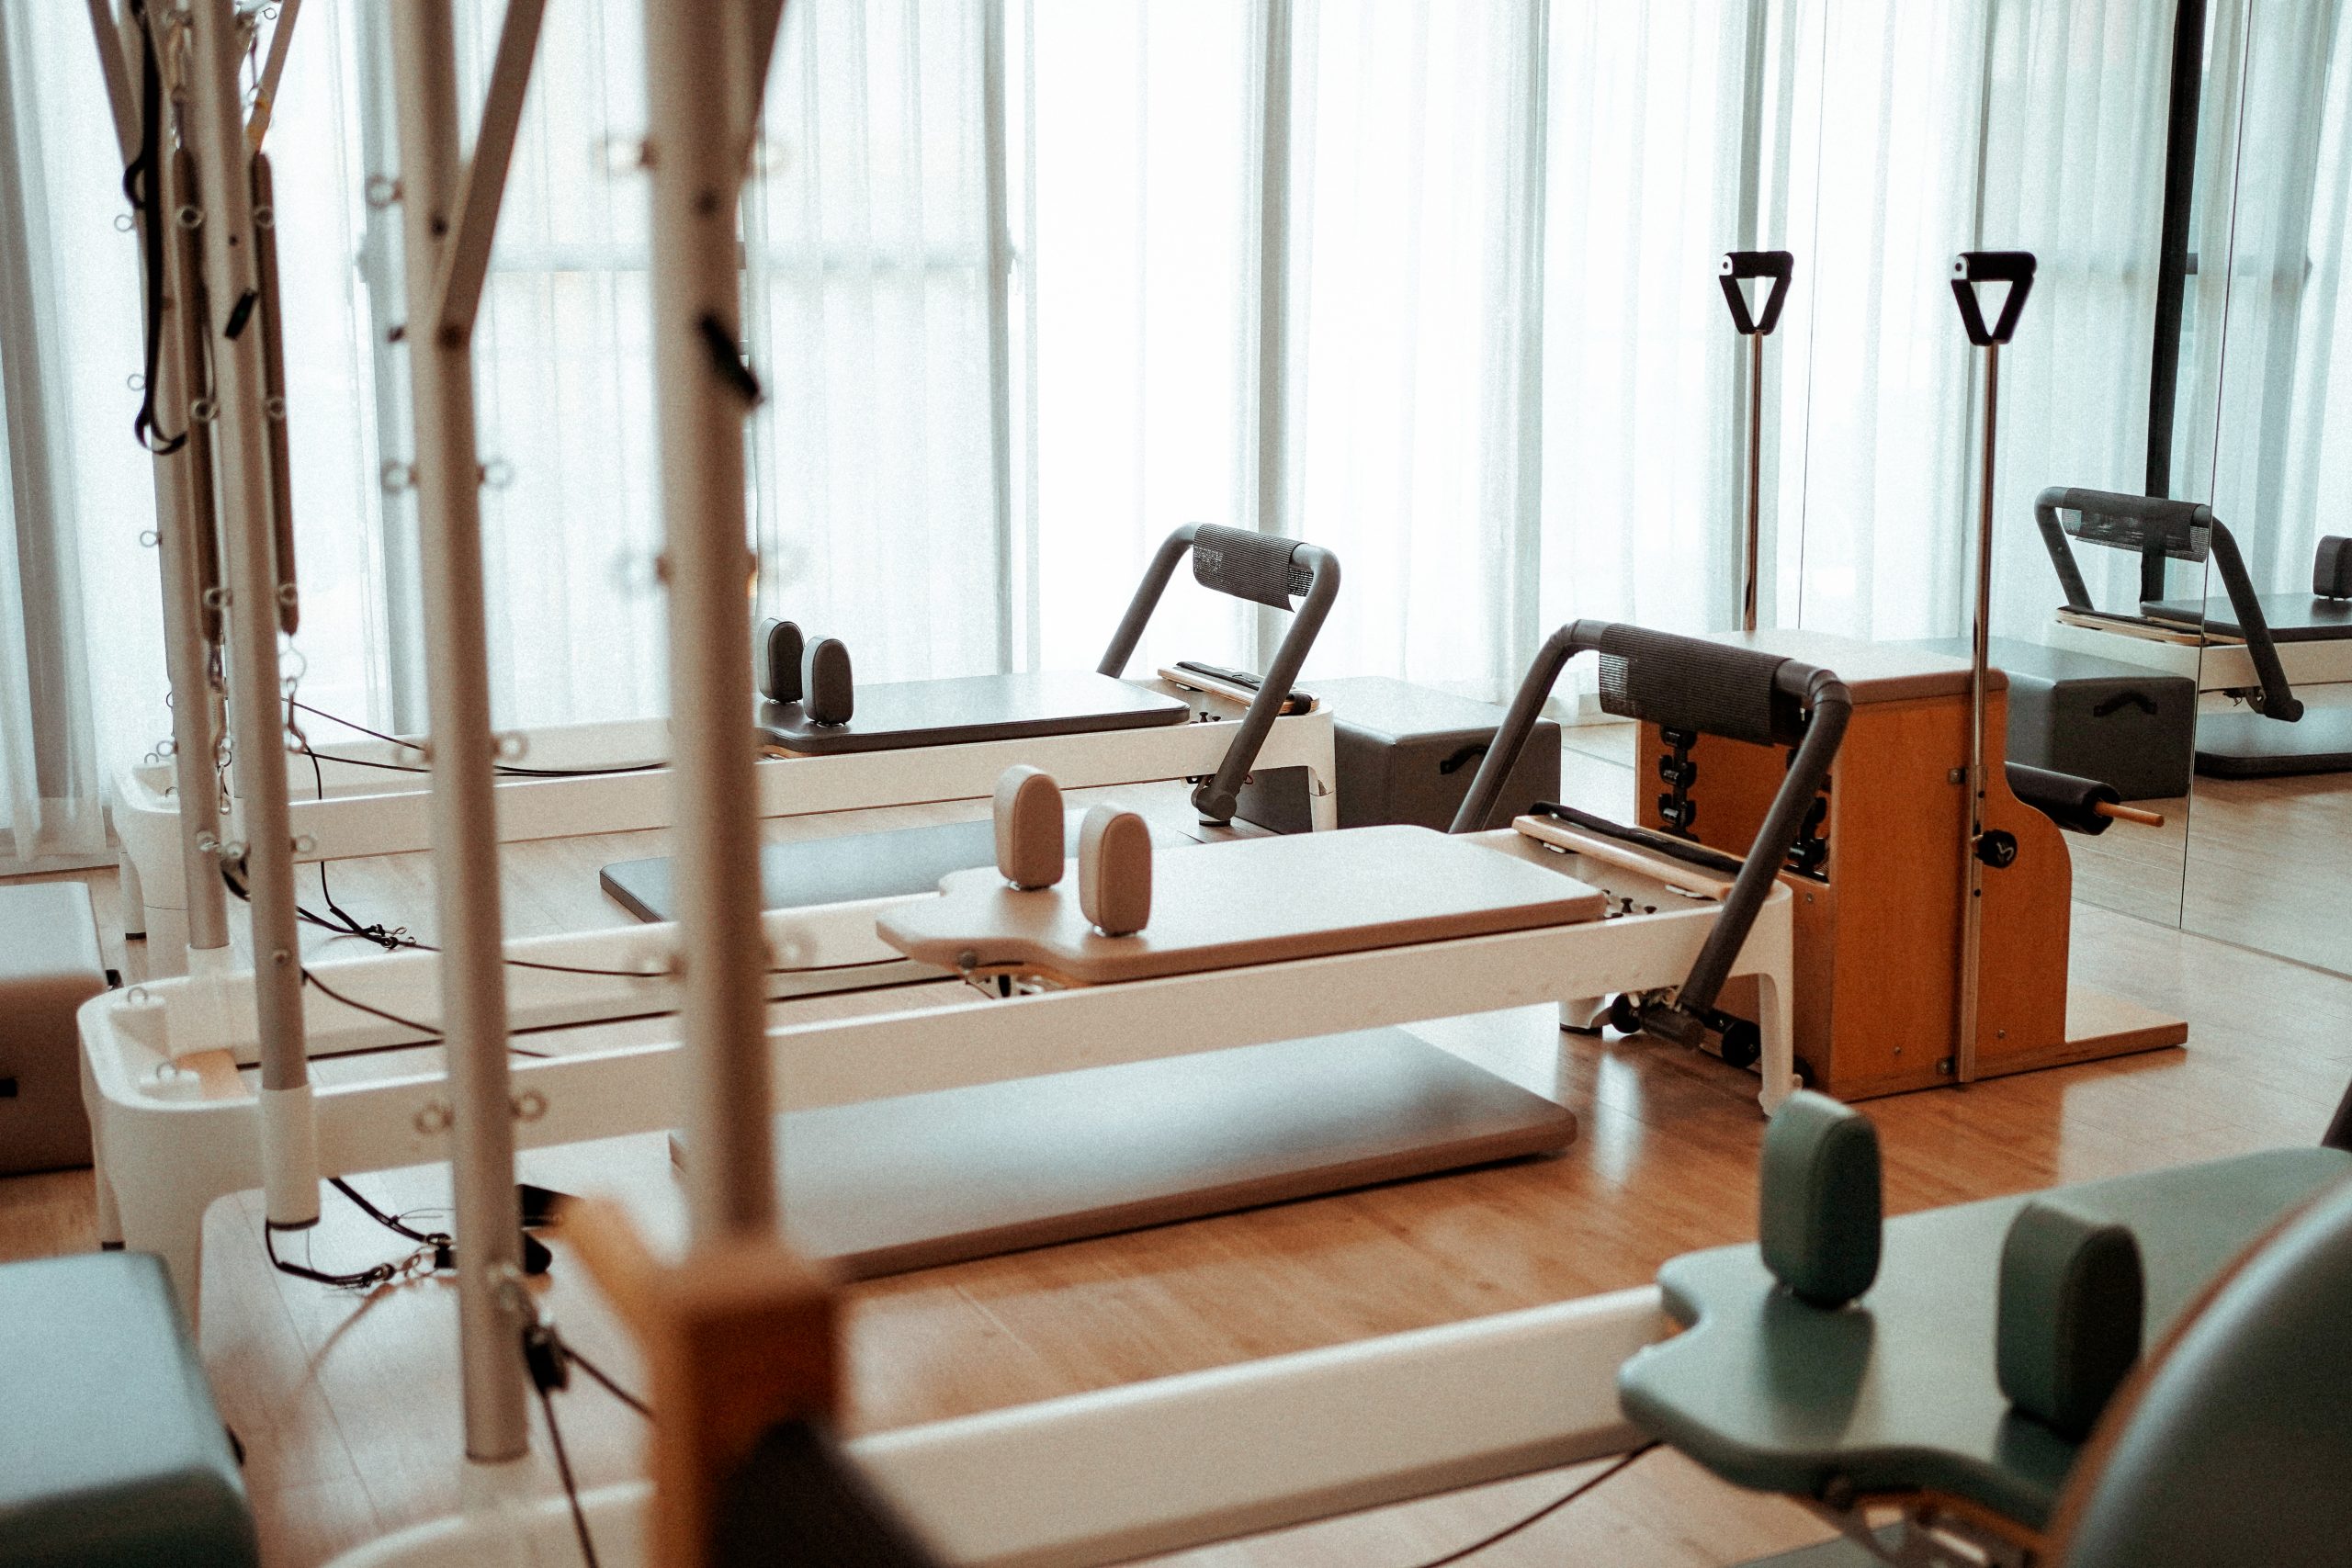 7 Pilates Studios in Hannover